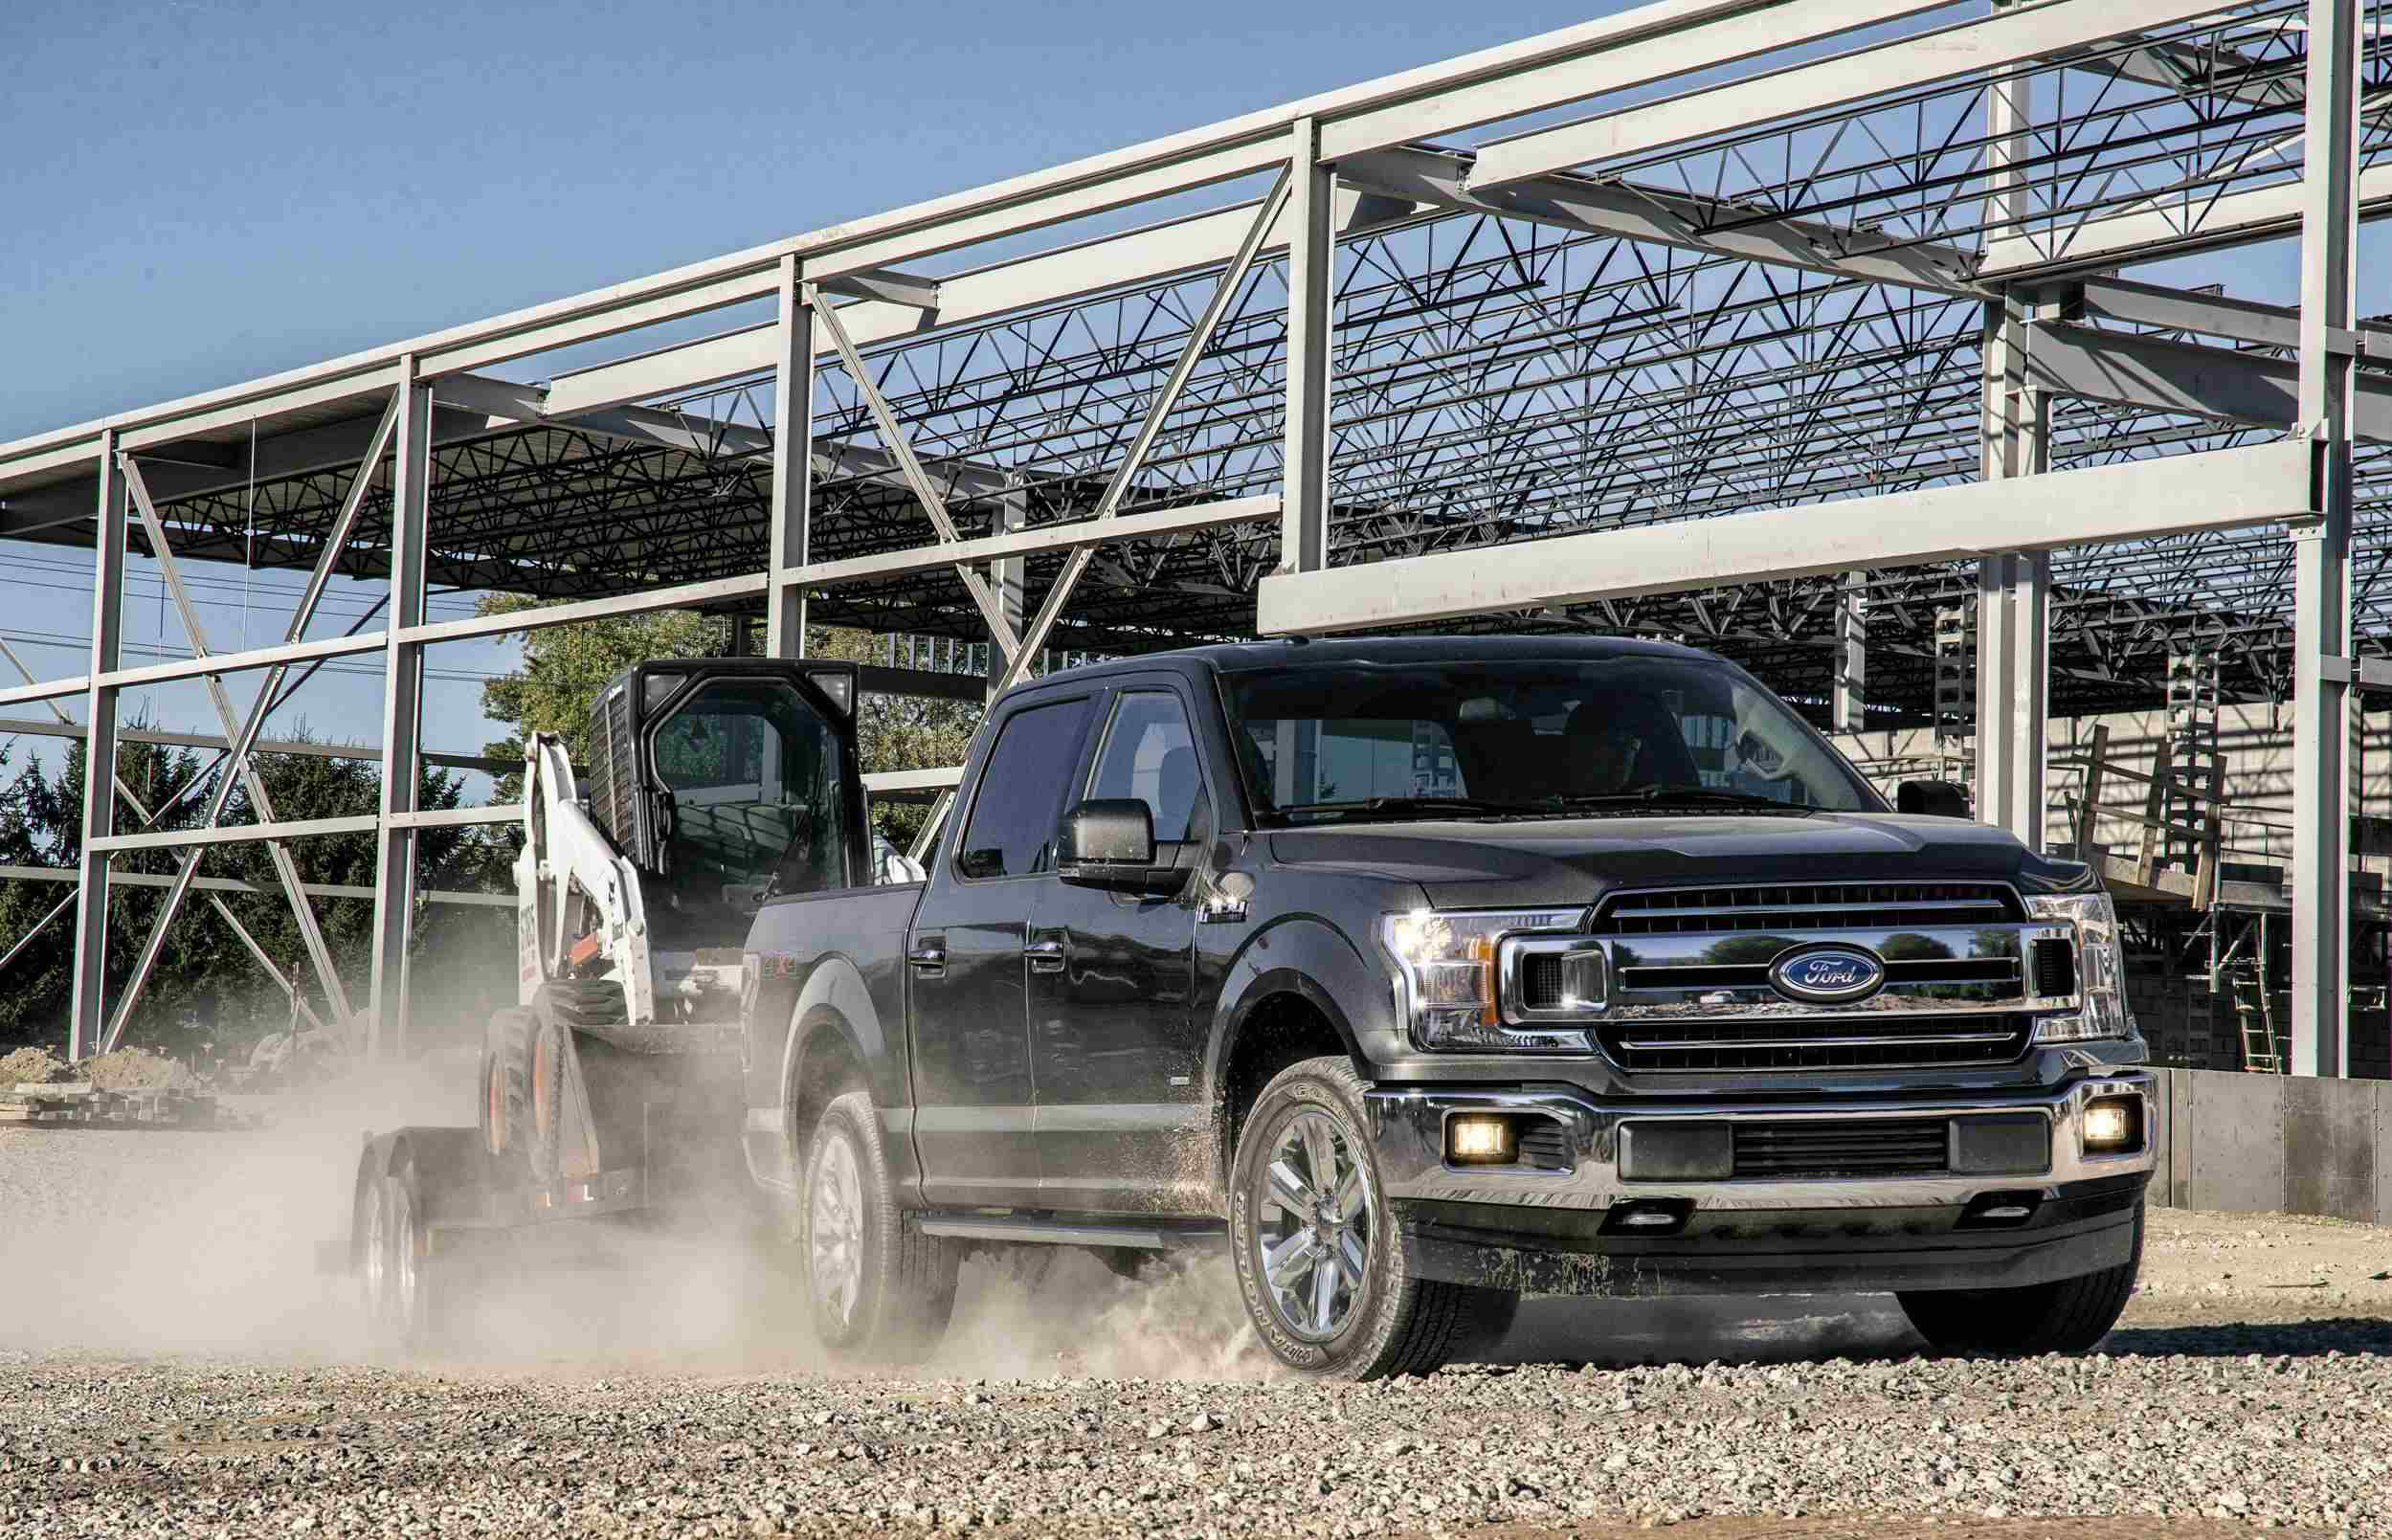 2018 Ford F-150 getting most advanced powertrain lineup yet | Medium 2018 Ford F 150 Xlt 2.7 Ecoboost Towing Capacity